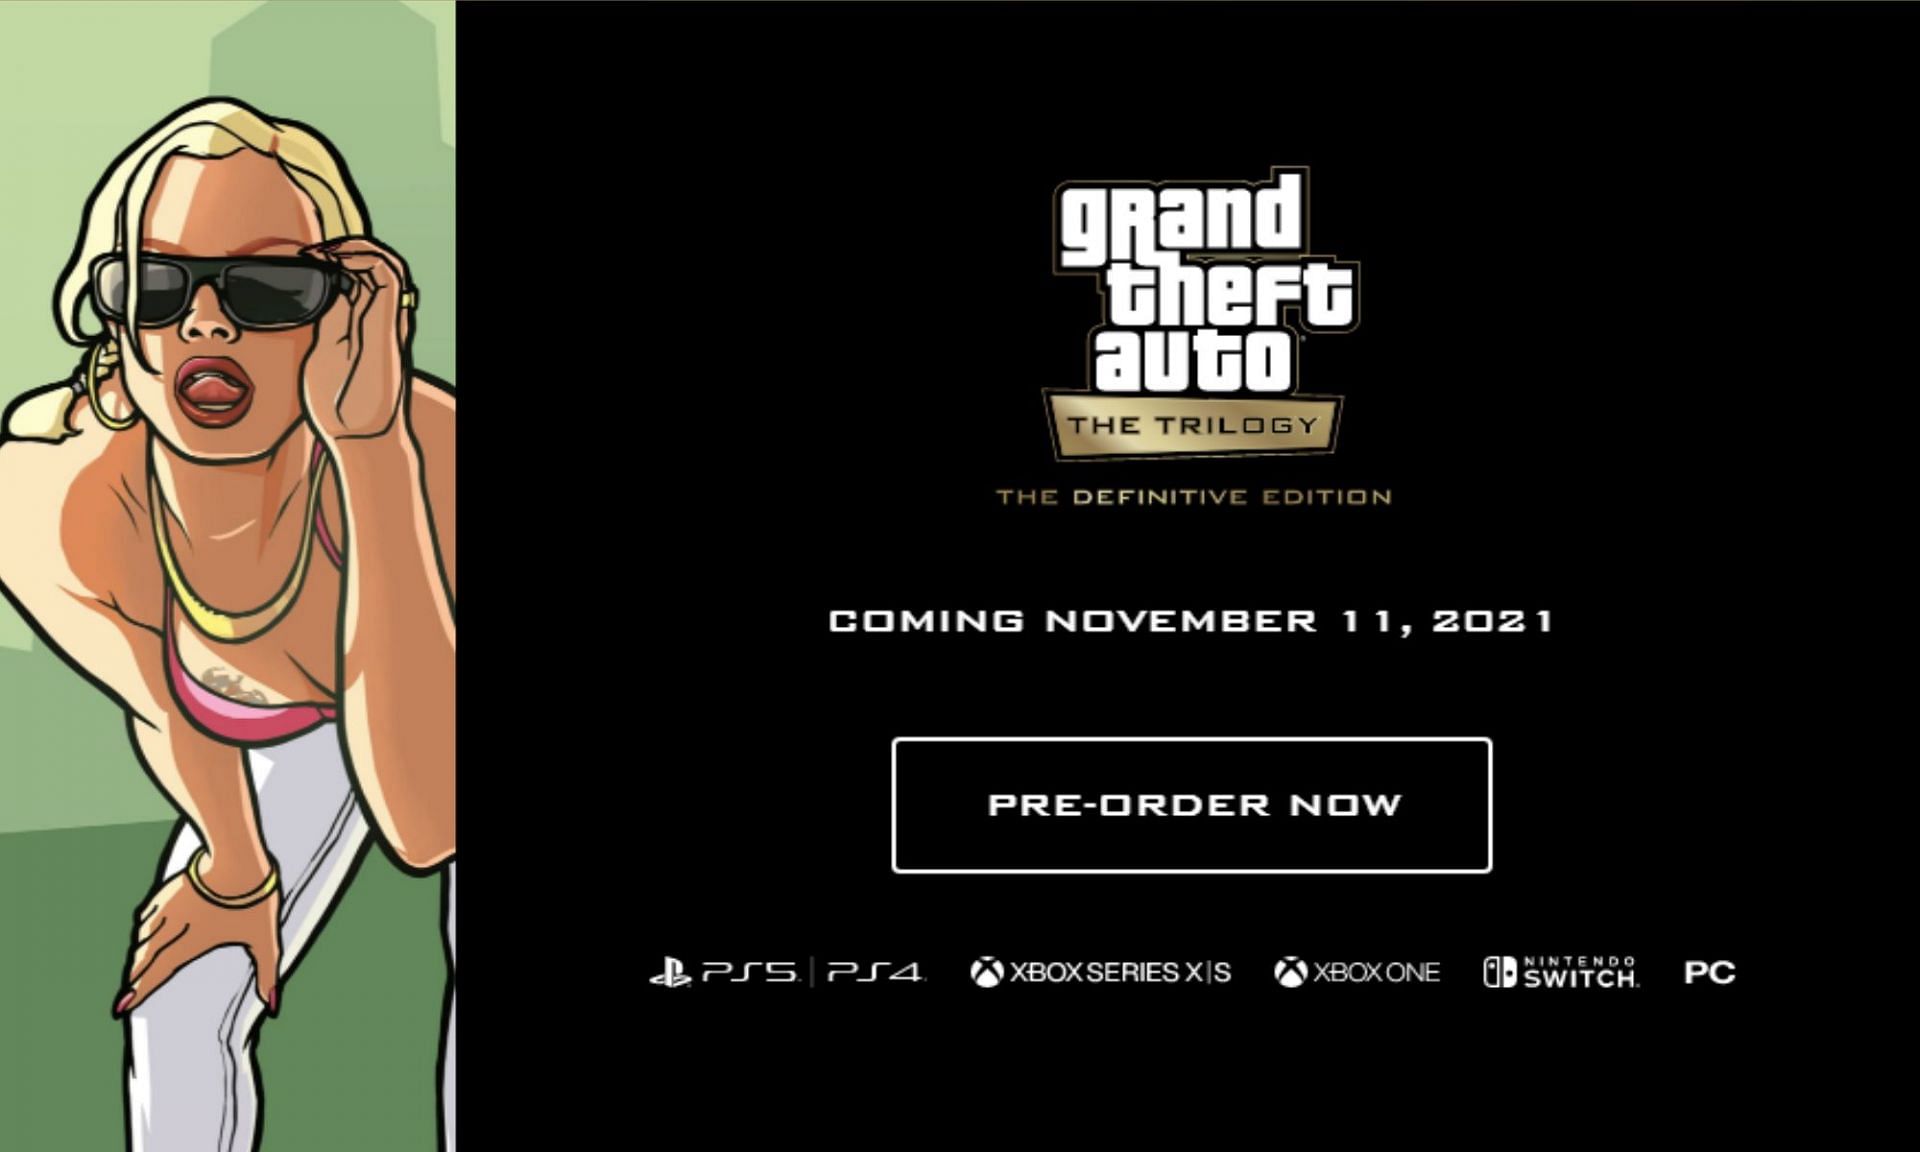 11 grand edition the – Theft Trilogy November Games, Definitive The Edition Grand The definitive theft Auto: - Coming iii auto Rockstar